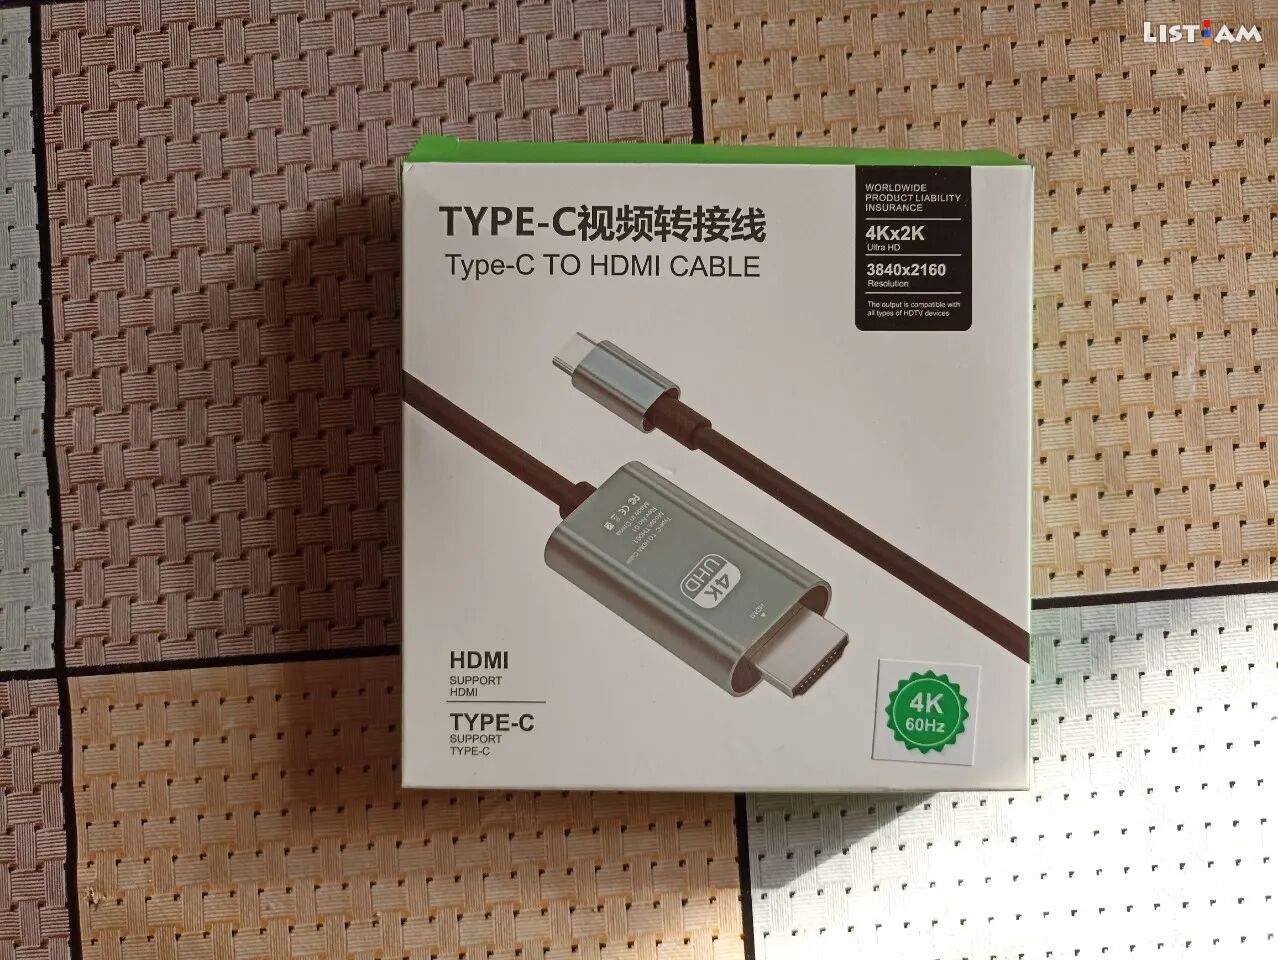 Type - C to HDMI